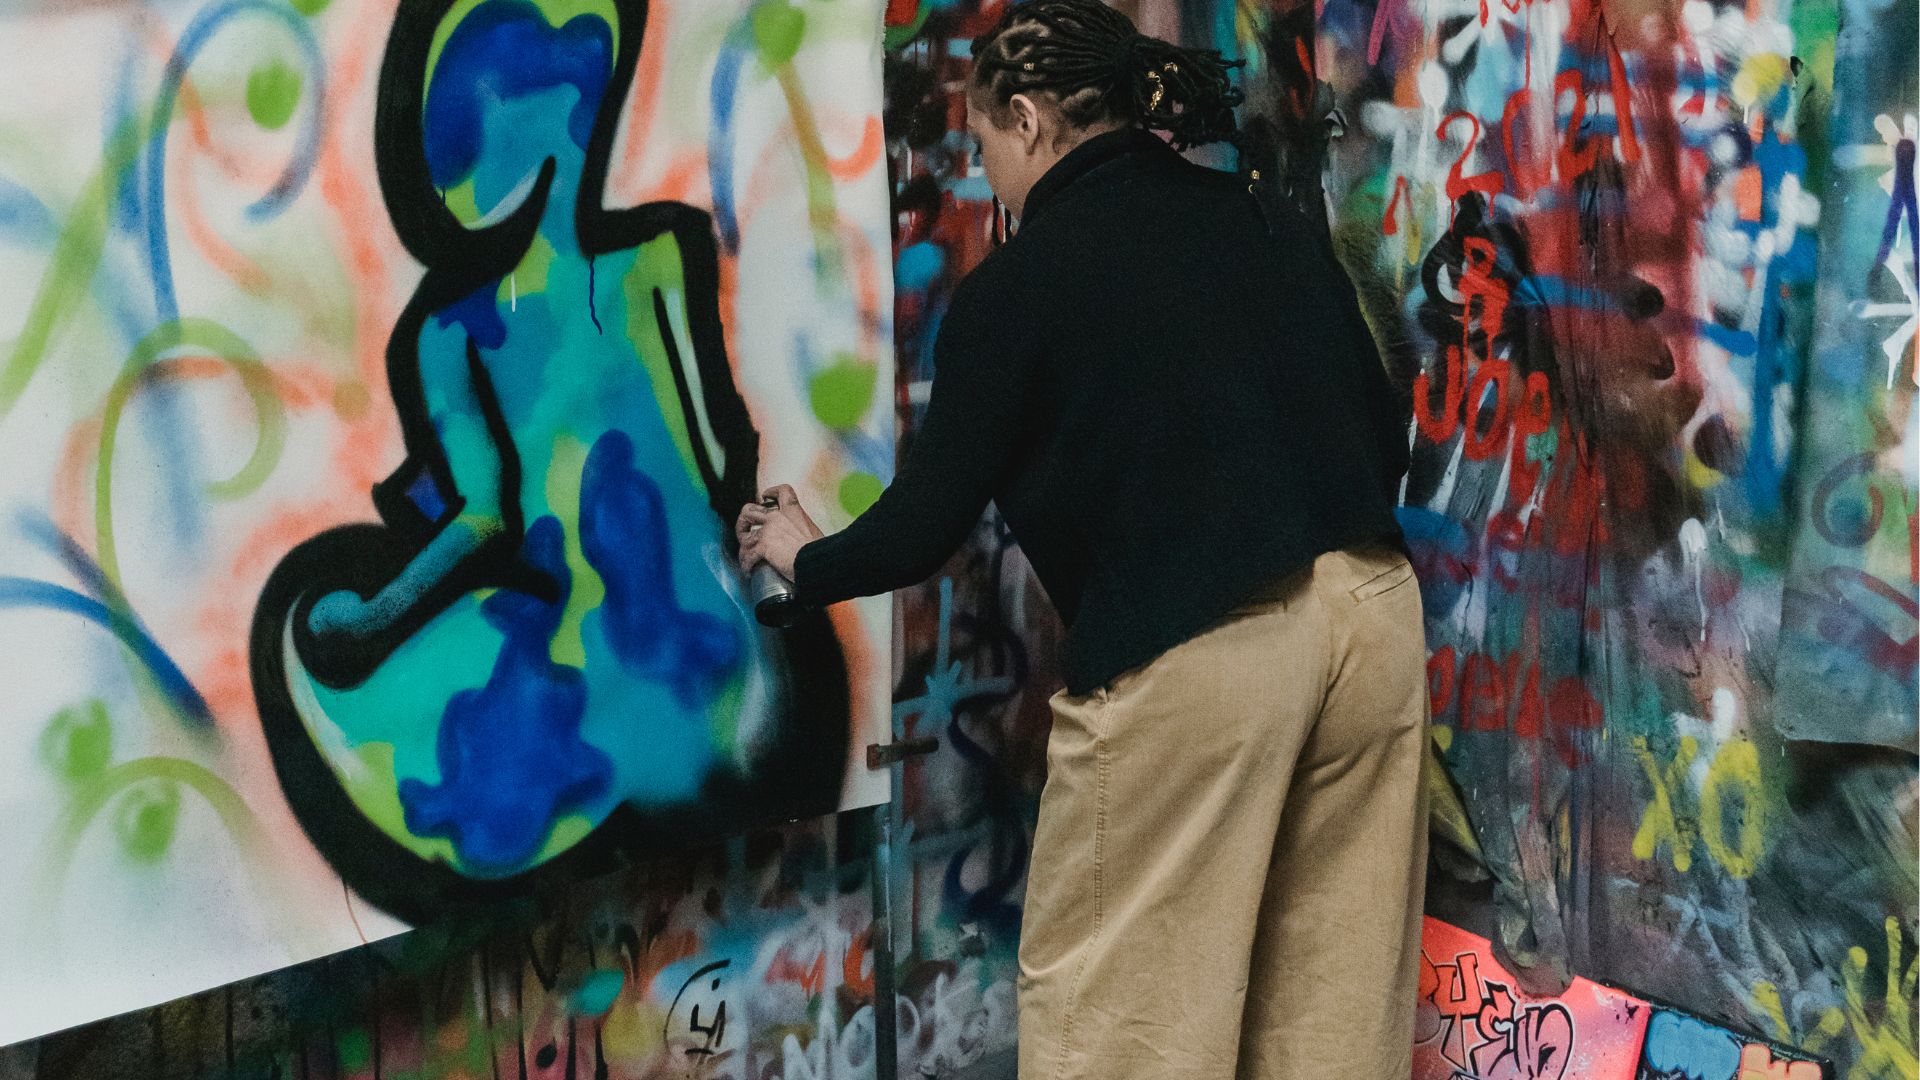 Woman in Black Shirt and Brown Pants Standing Beside Wall With Graffiti